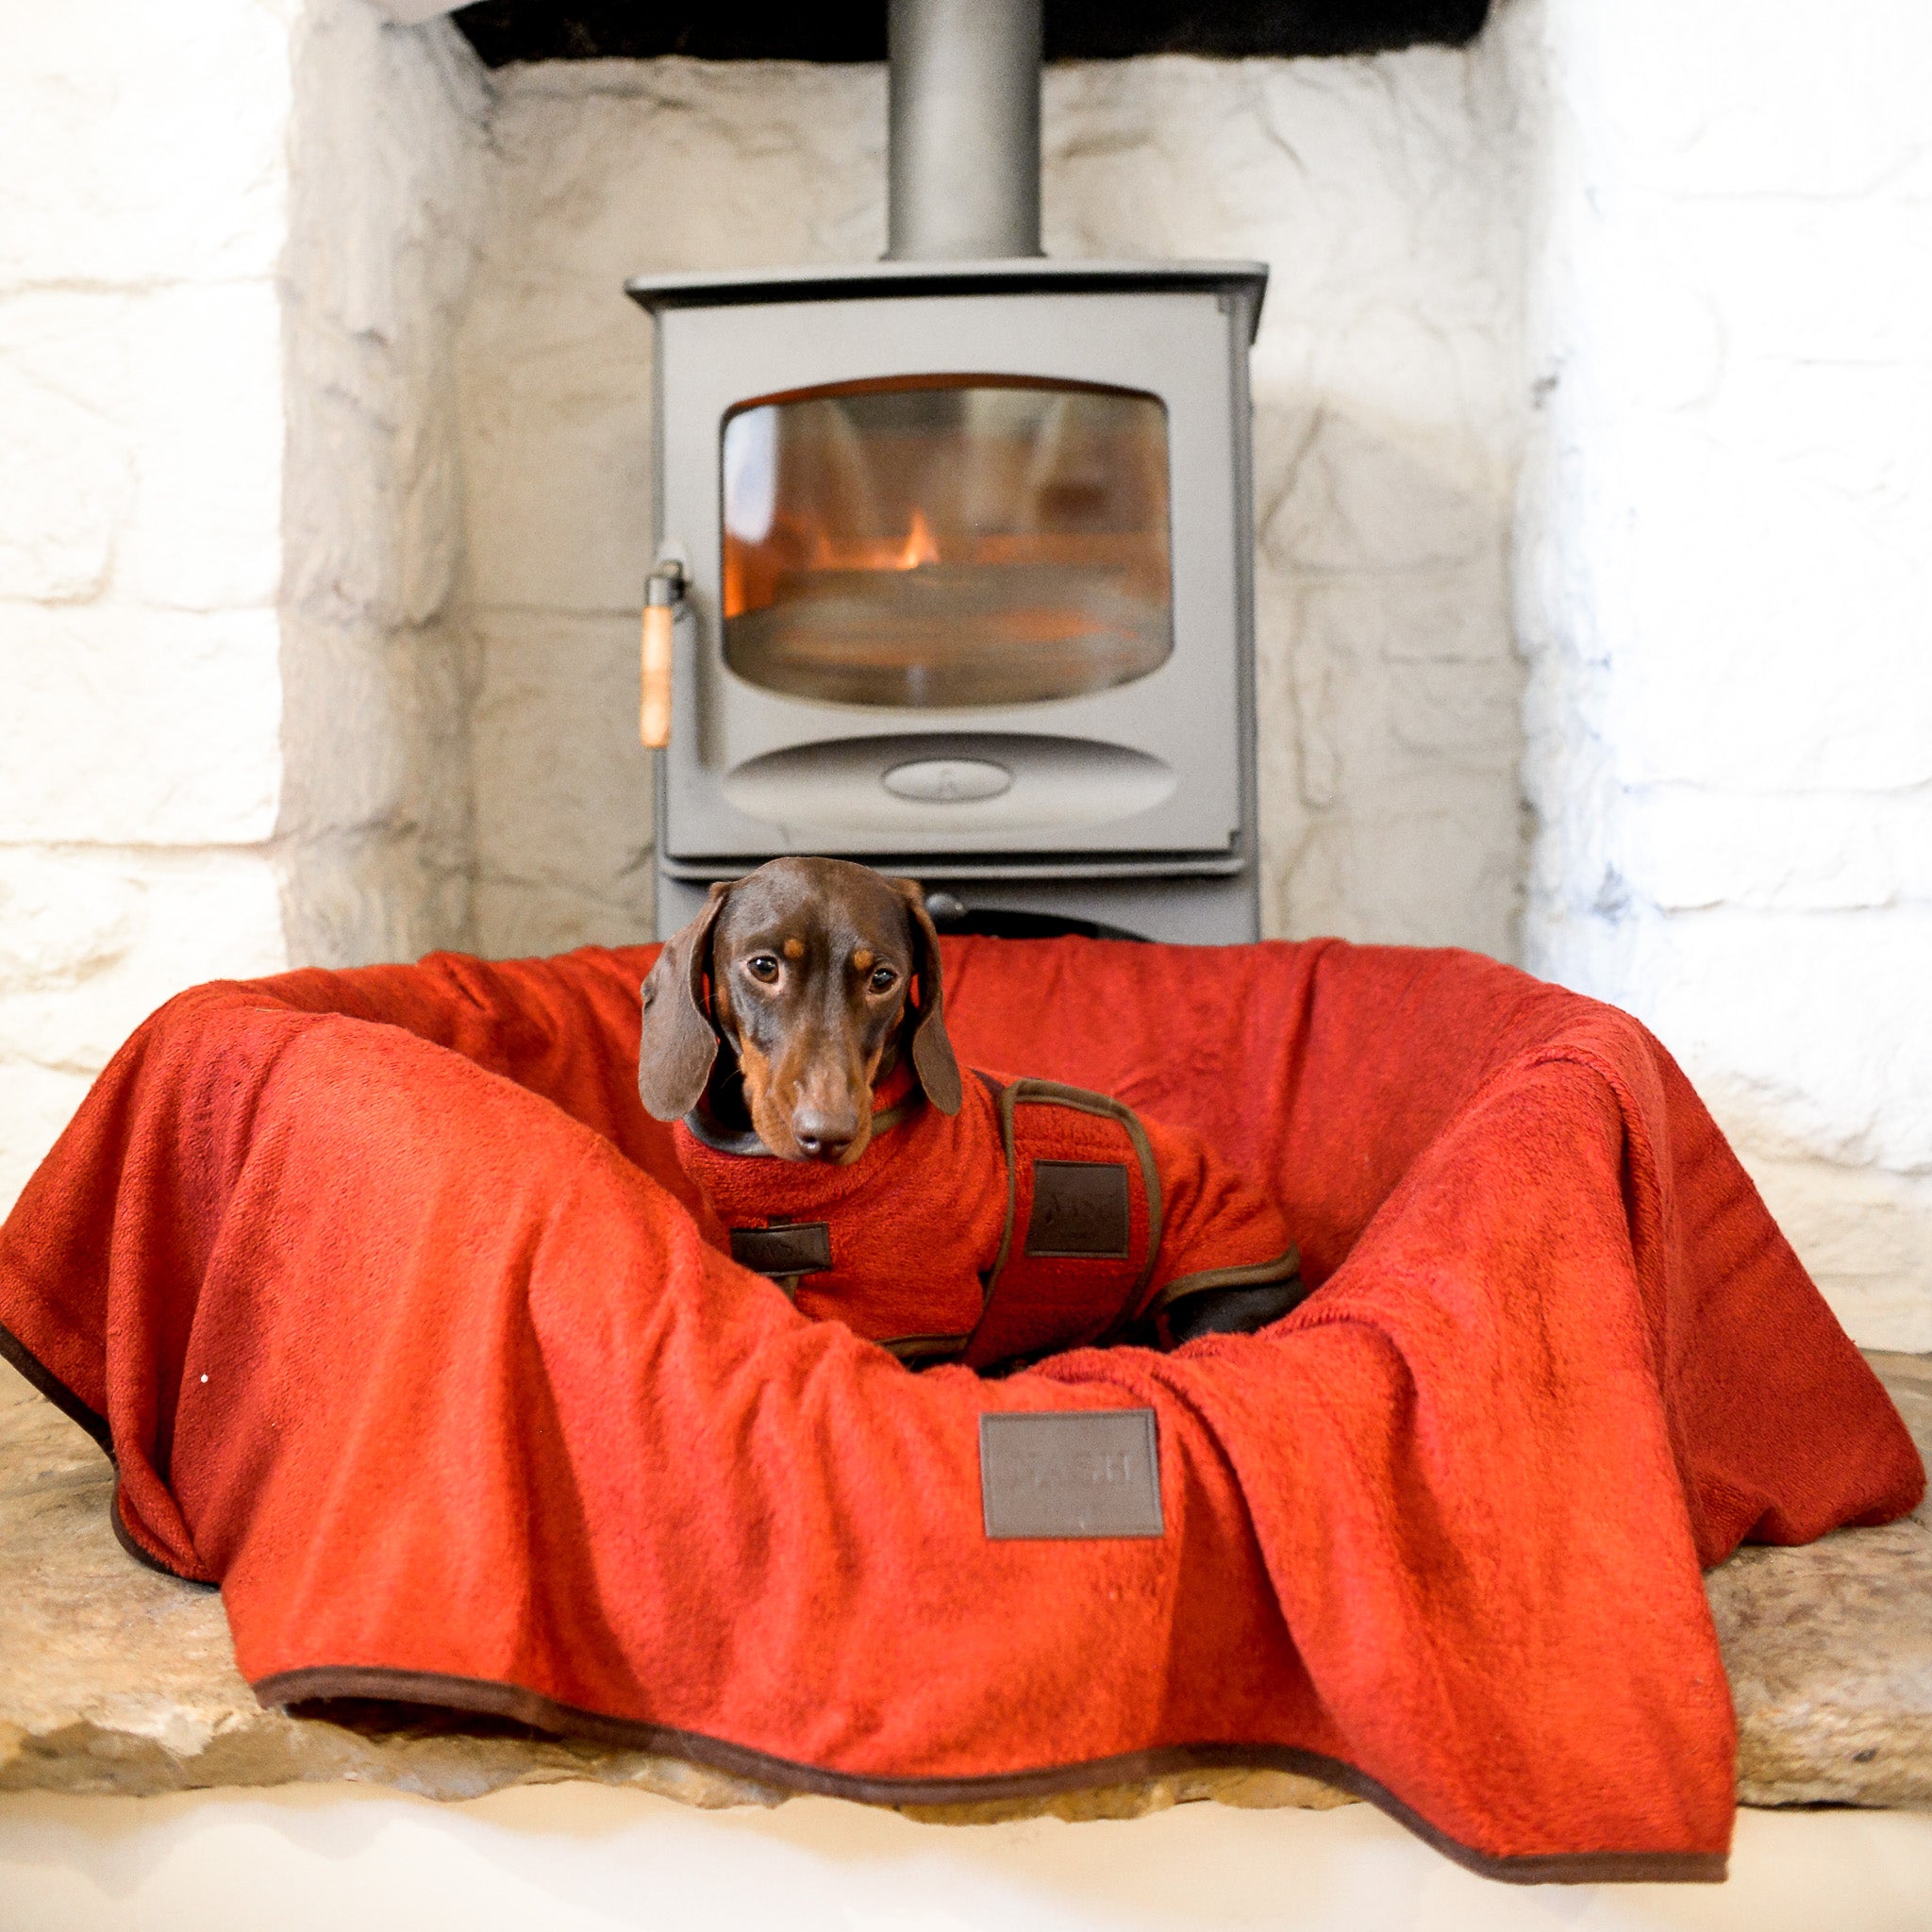 Dachshund wearing a NASH bamboo dog drying coat in red, resting in its bed. The bed has been lined with the matching NASH dog bamboo throw.